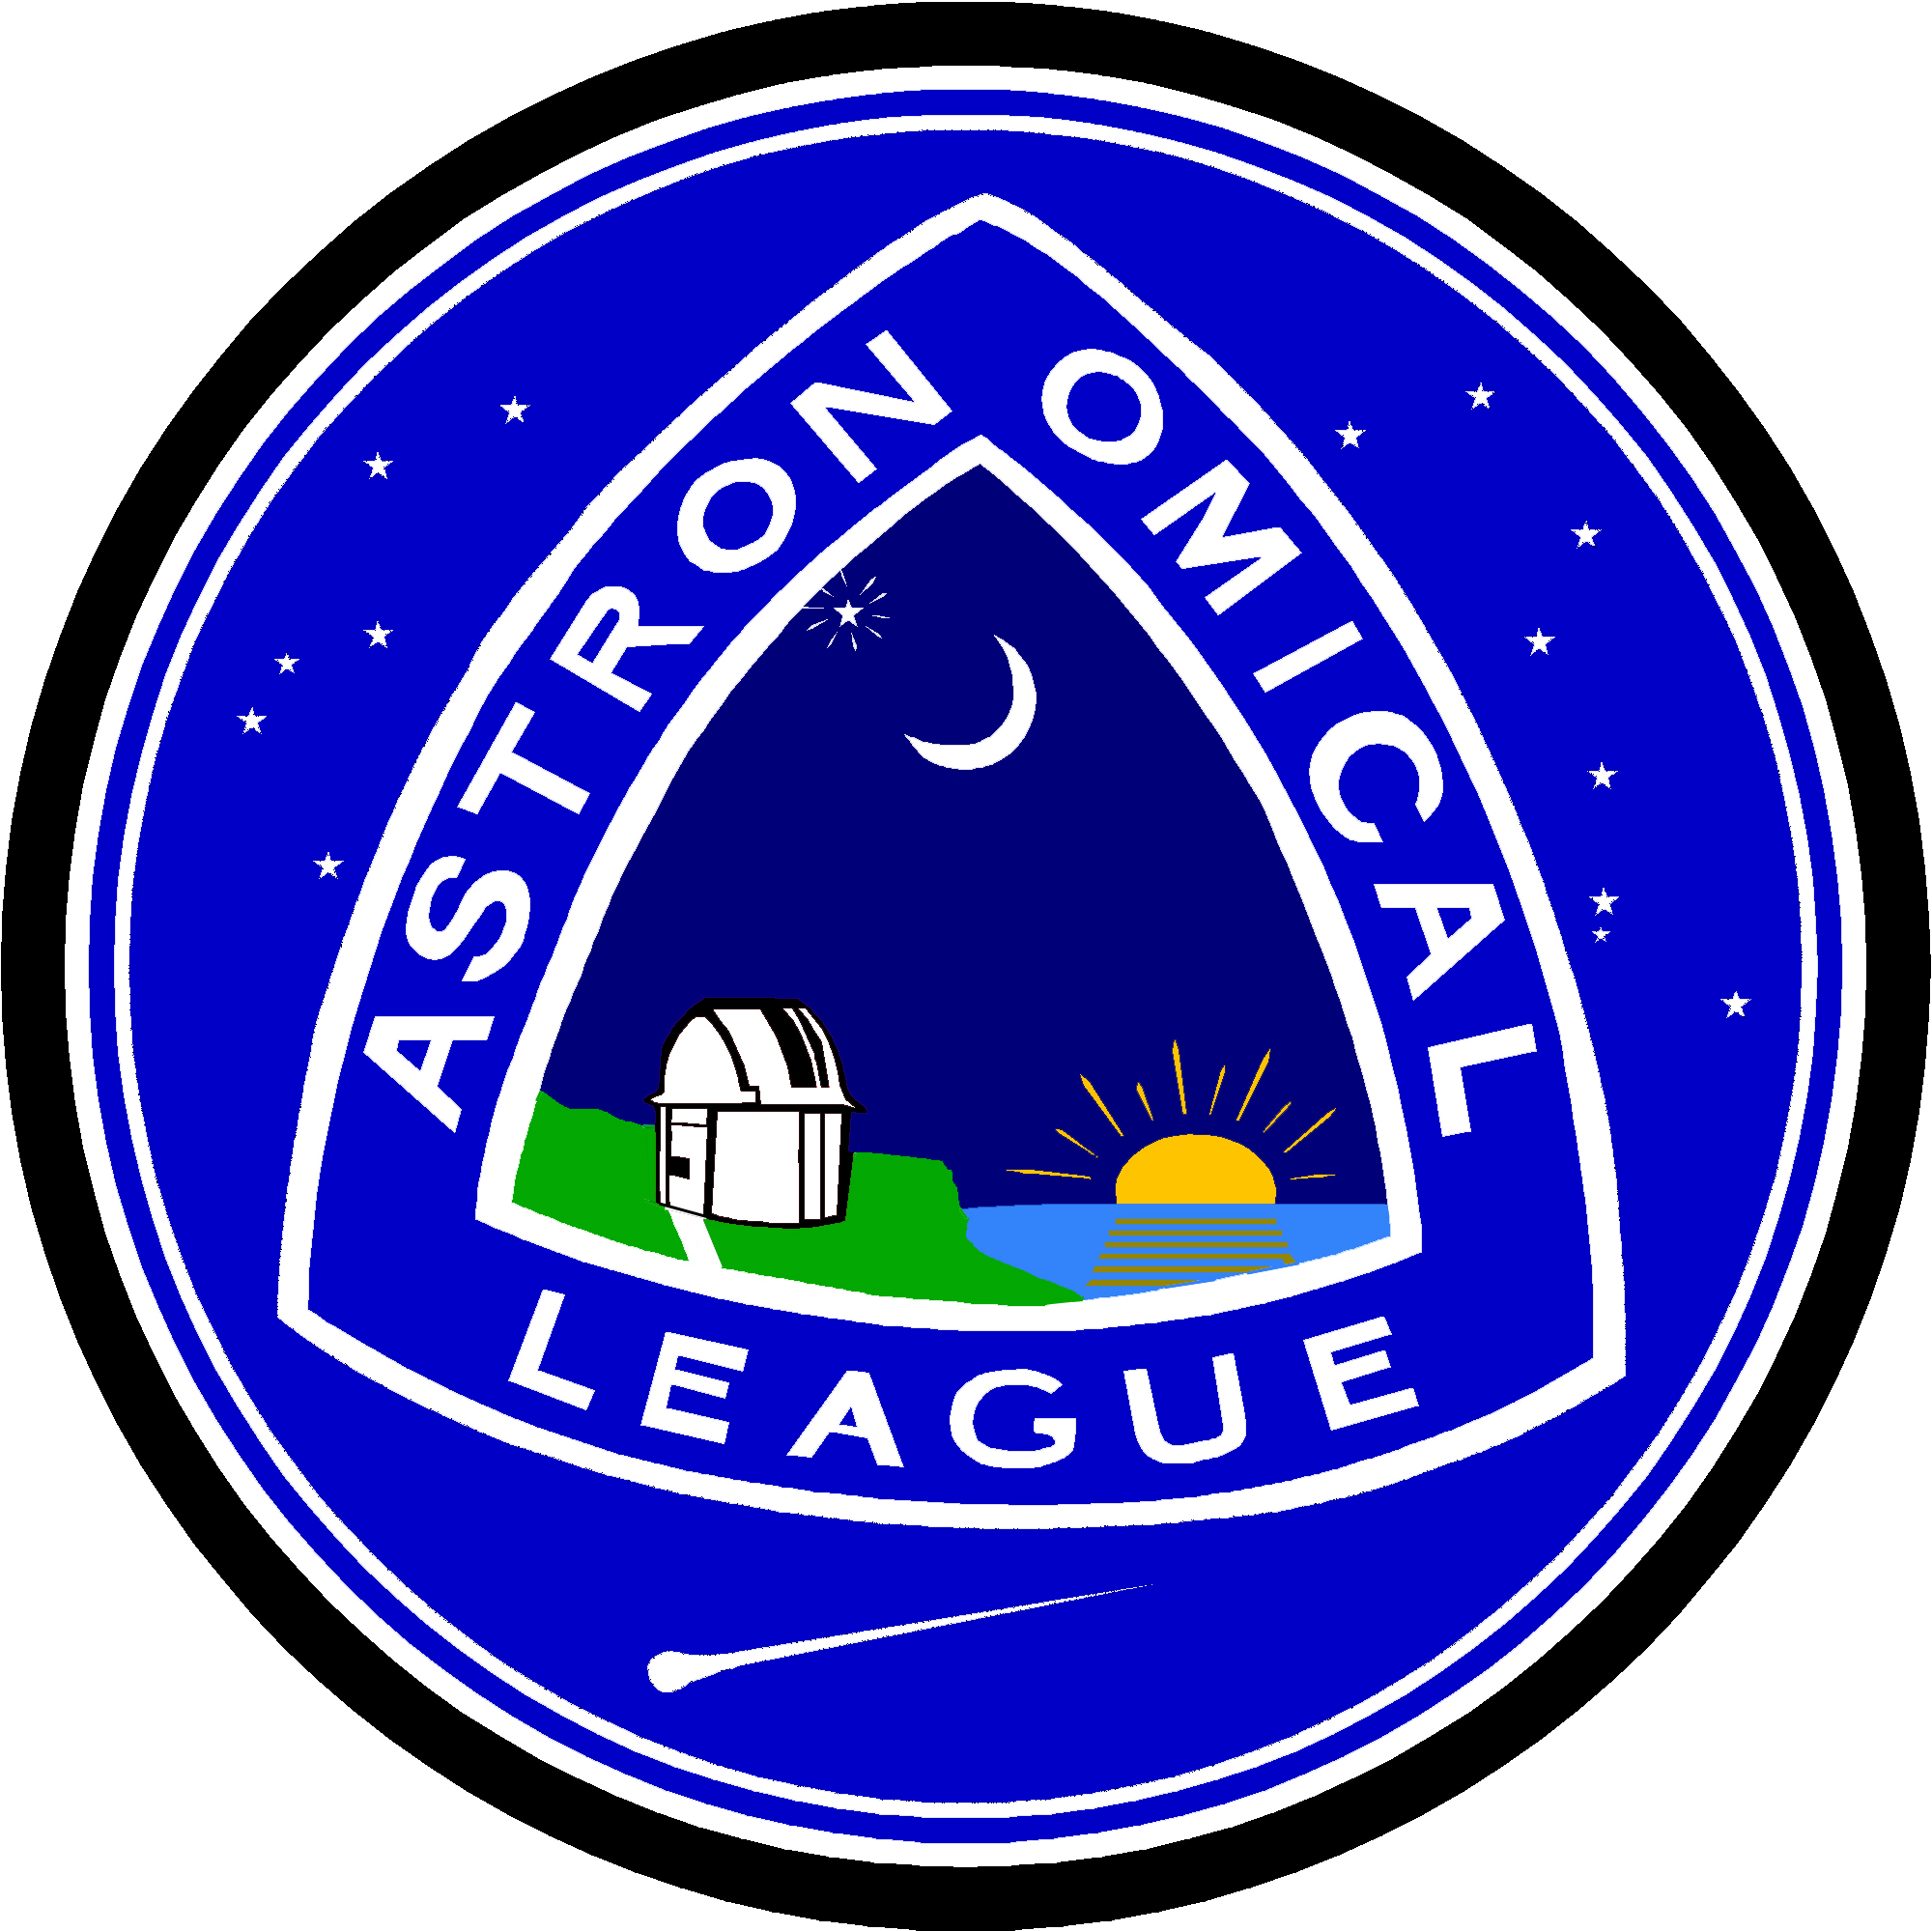 Donate to the Astronomical League